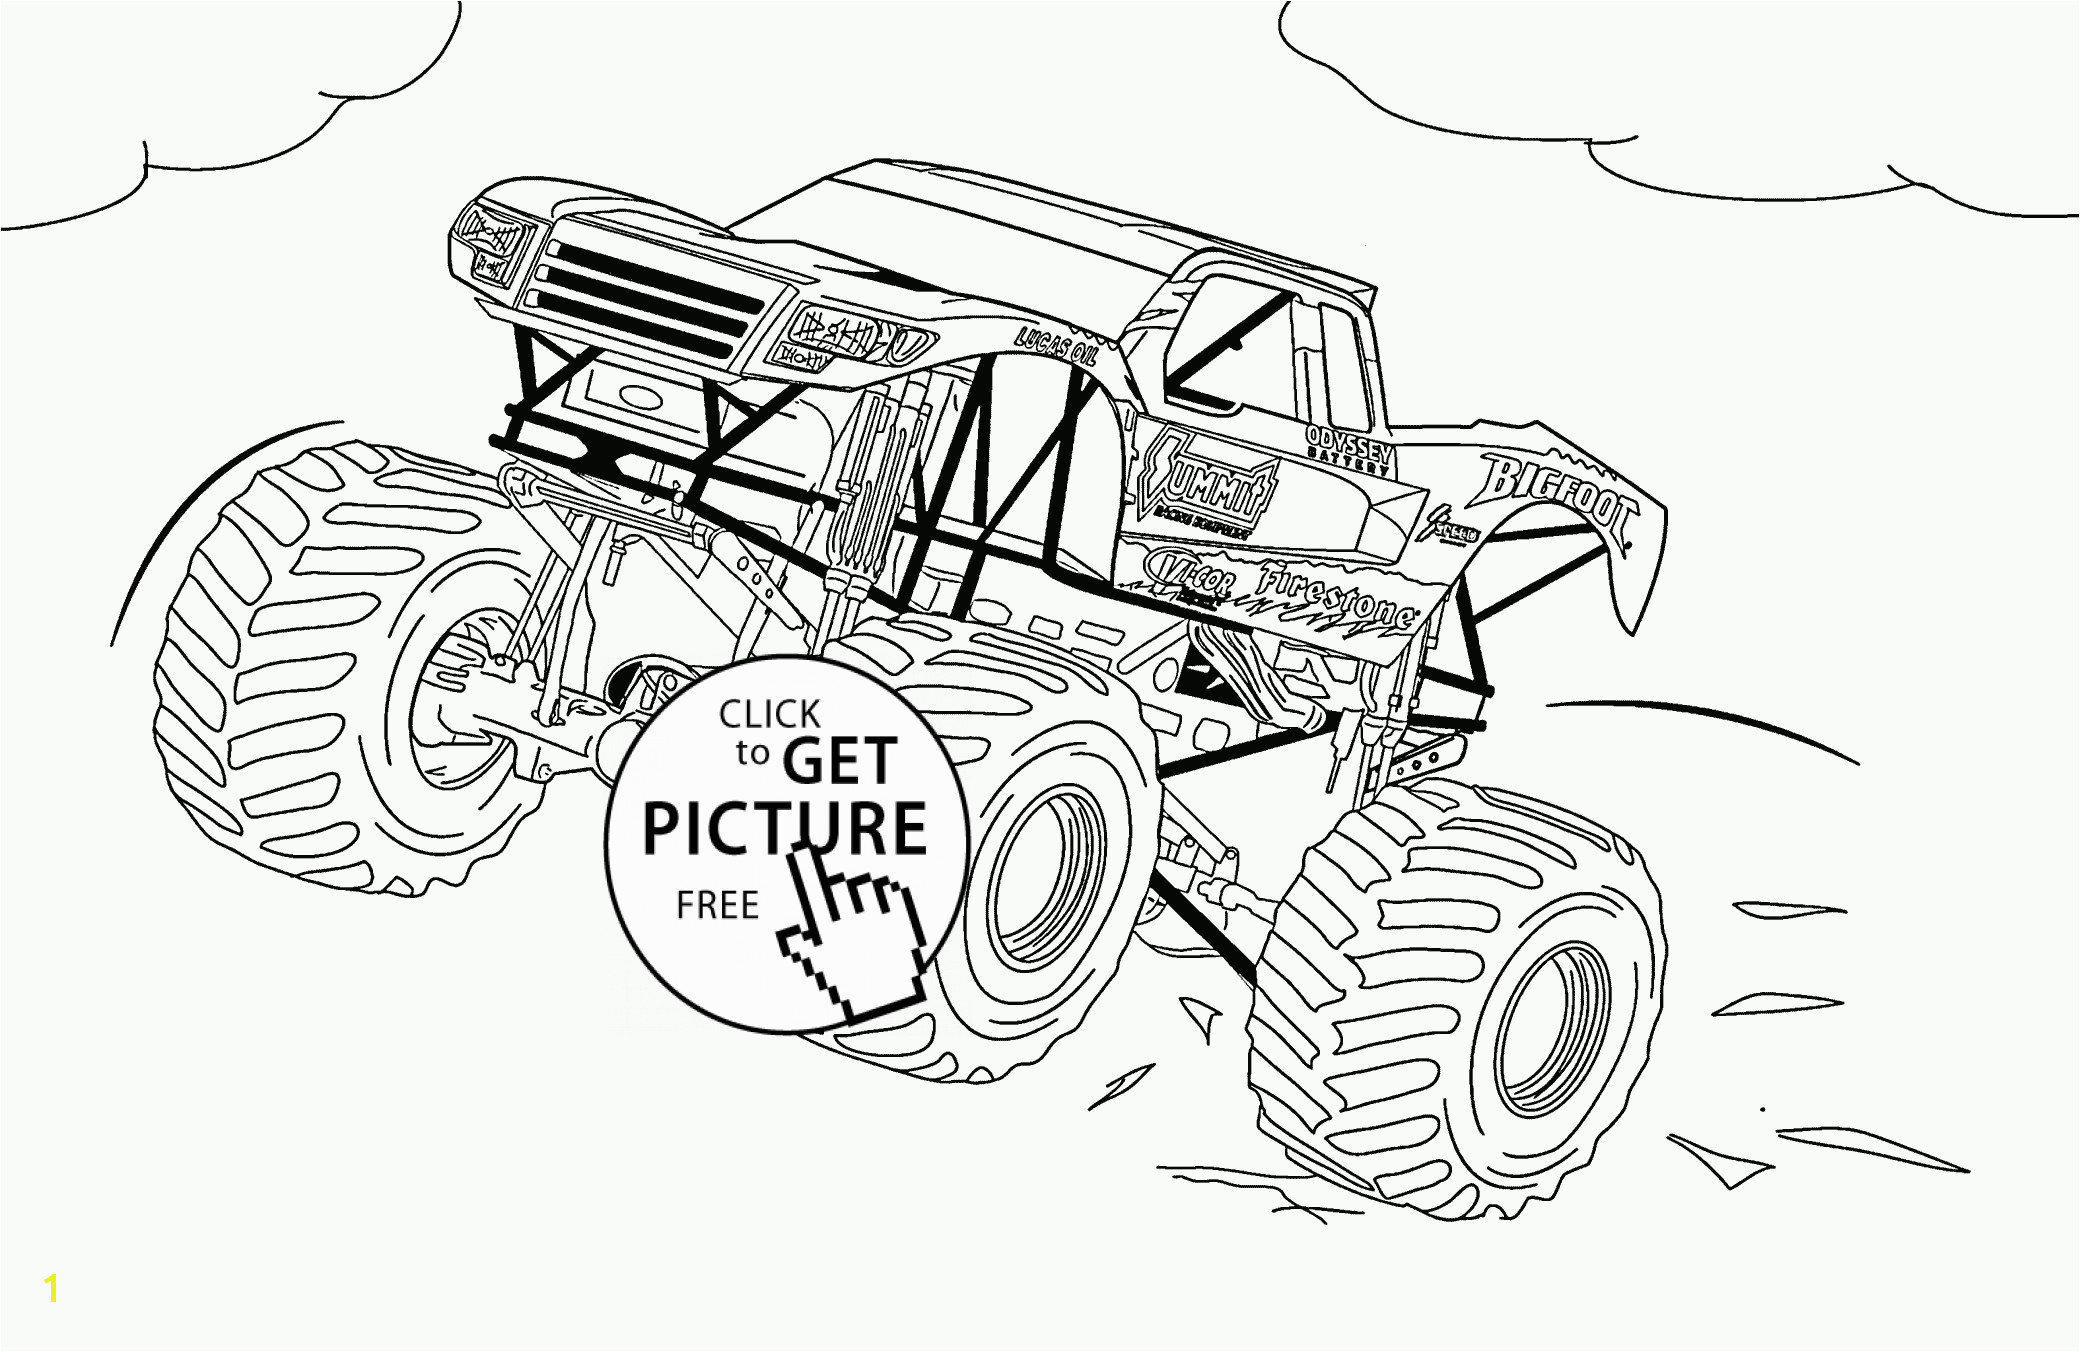 Bigfoot Monster Truck coloring page for kids transportation coloring pages printables free Wuppsy